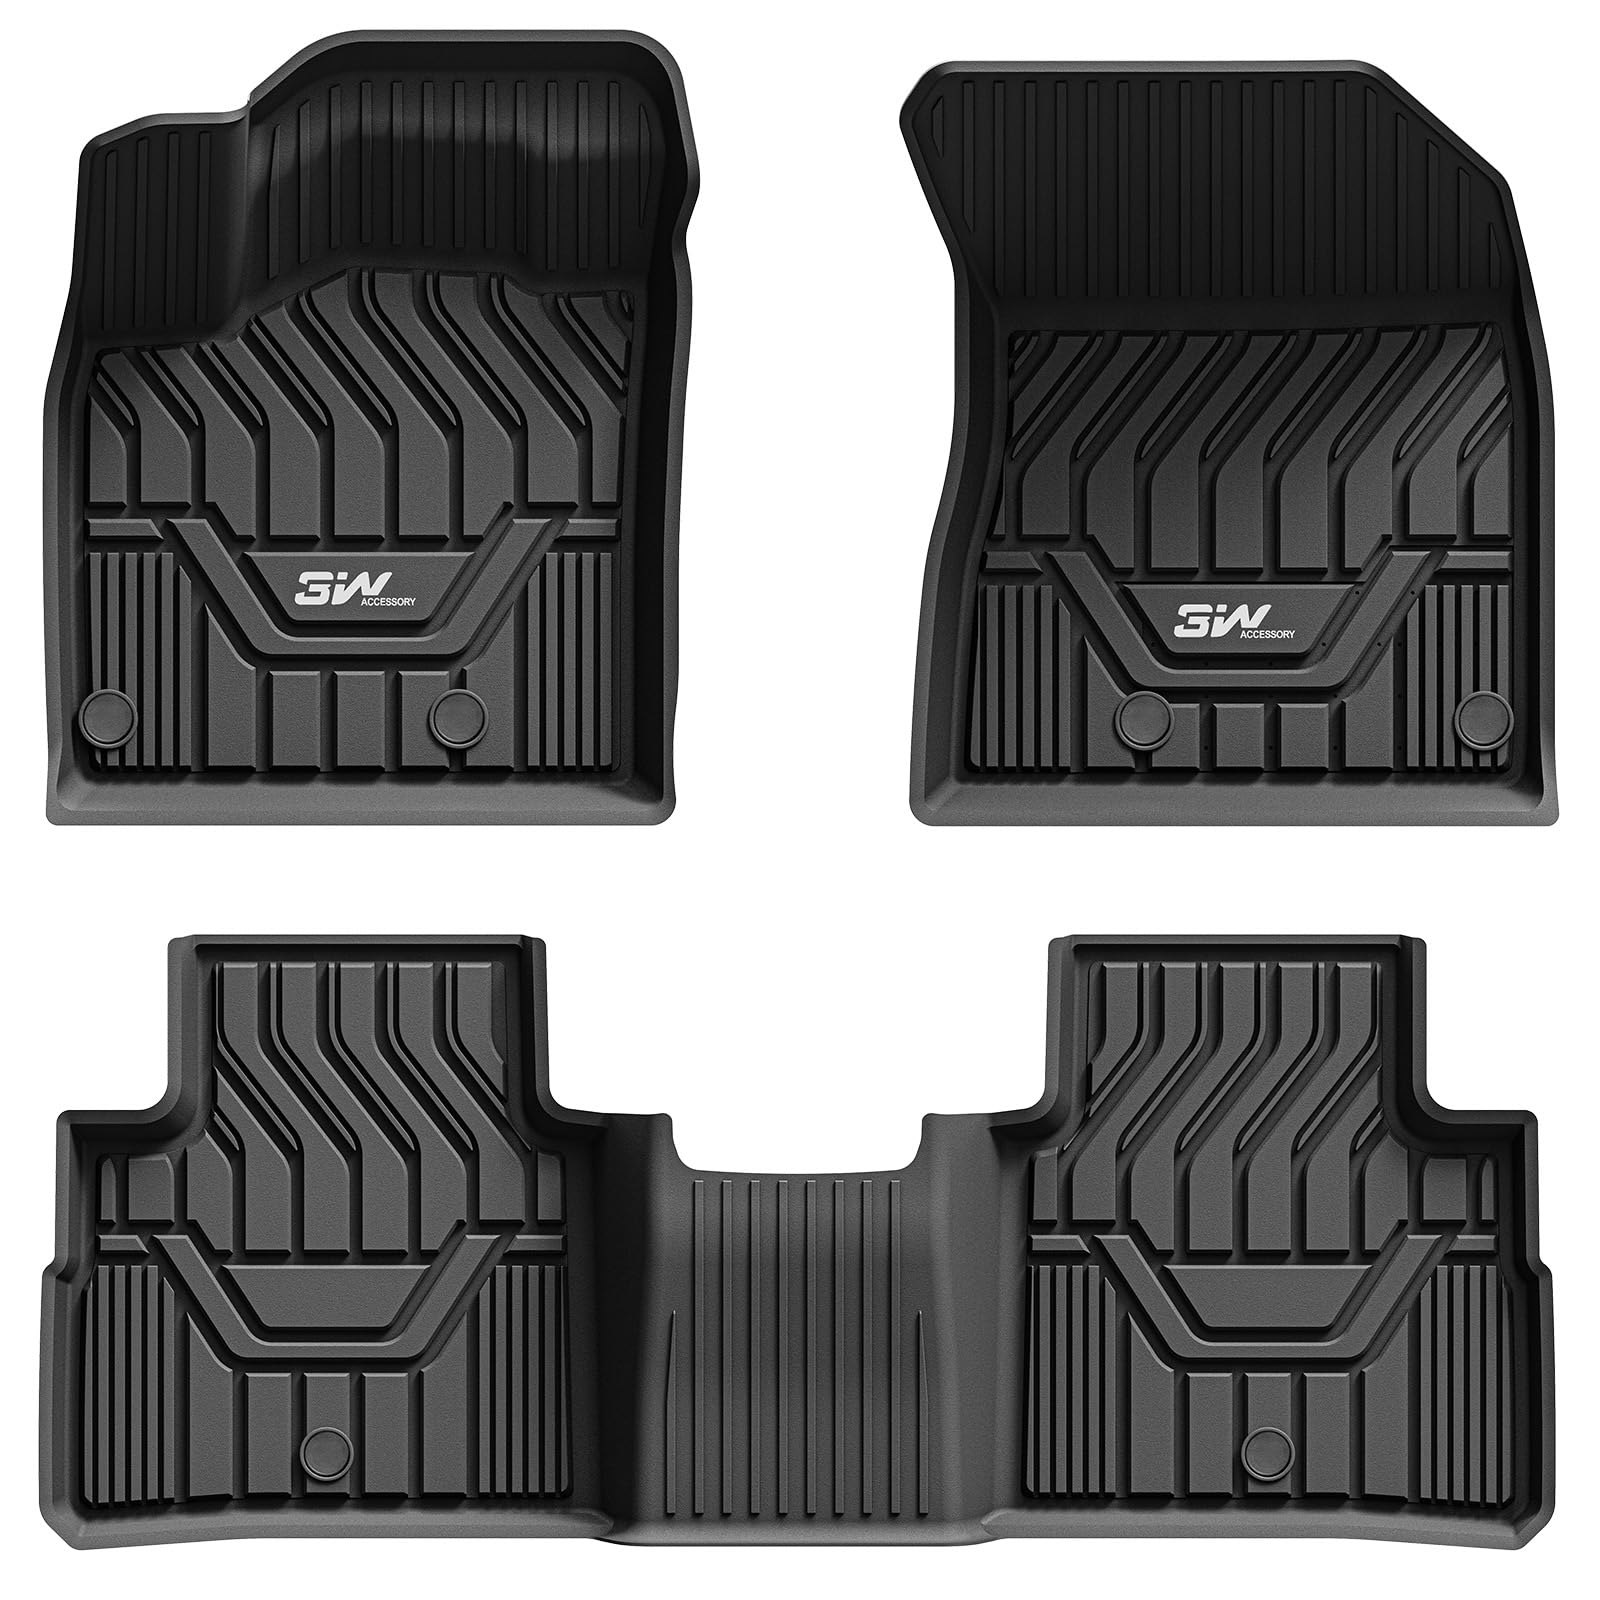 3W Nissan Rogue 2021-2023 Custom Floor Mats TPE Material & All-Weather Protection Vehicles & Parts 3Wliners 2021-2023 Rogue 2021-2023 1st&2nd Row Mats